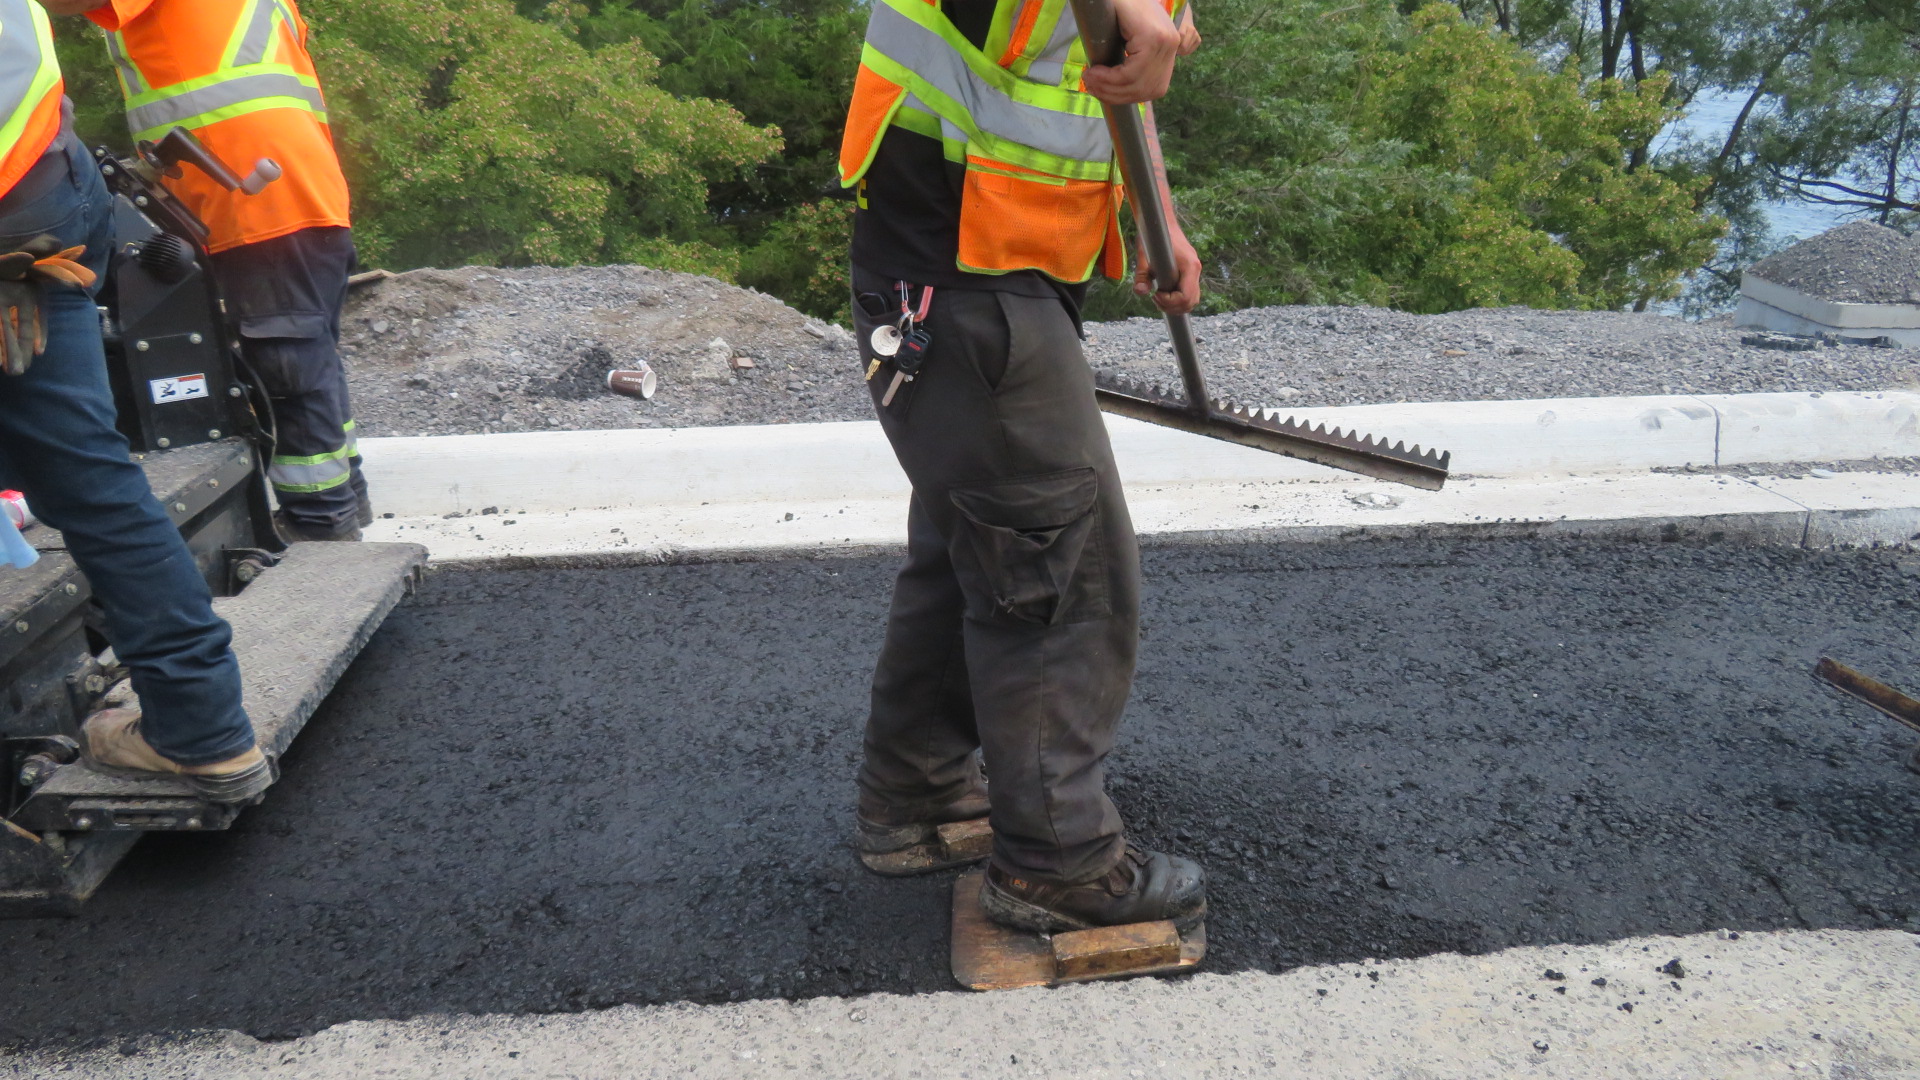 Tamping the newly placed asphalt